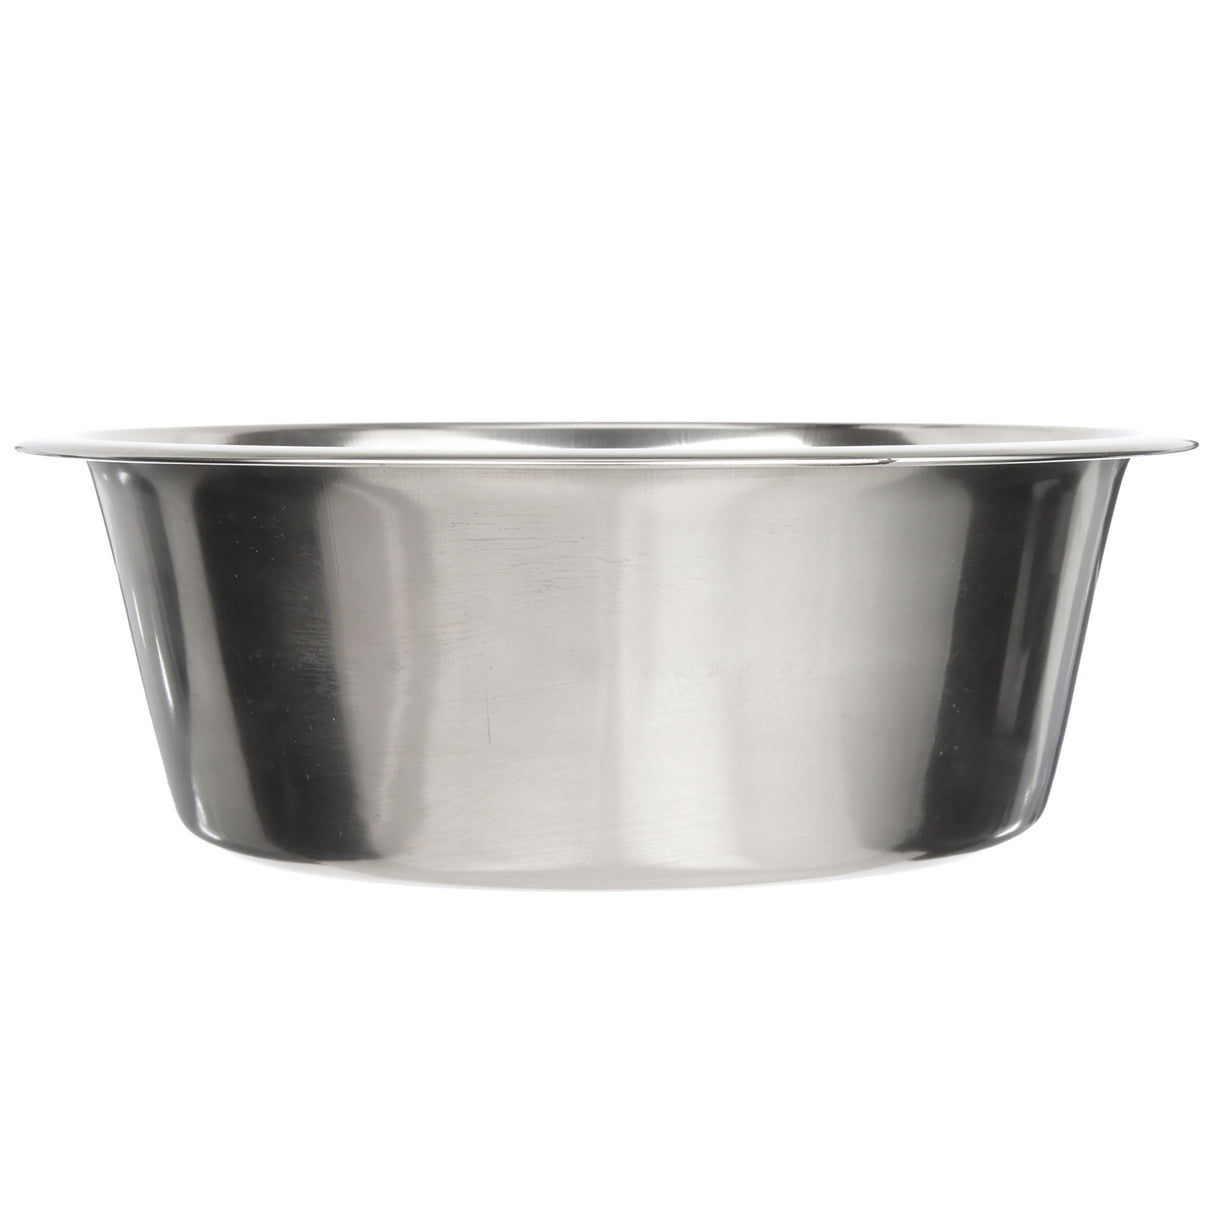 Neater Pet Brands Stainless Steel Dog and Cat Bowls - Extra Large Metal Food and Water Dish (12 Cup)